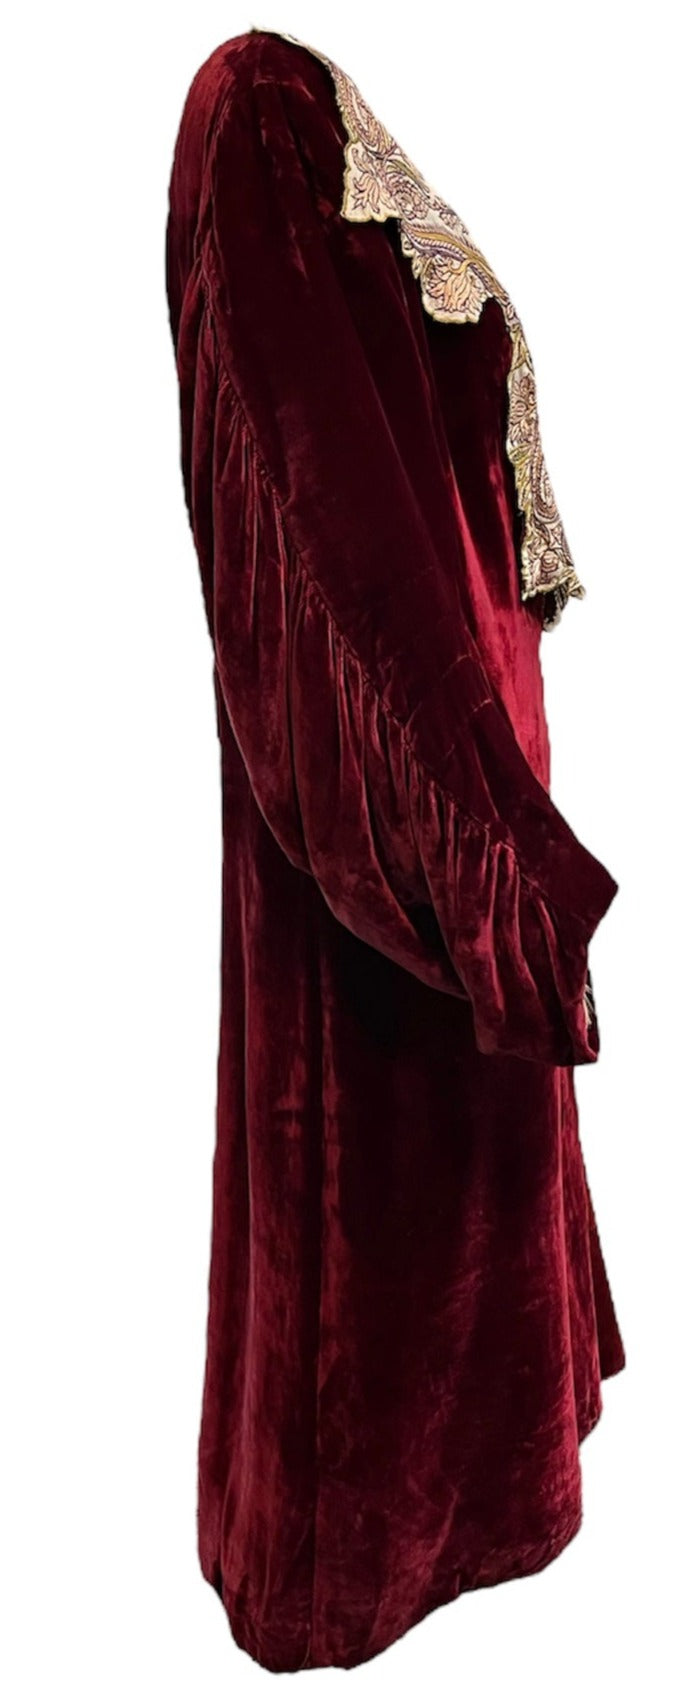 20s Lord & Taylor Ruby Red Silk Velvet Opera Coat with Embroidered Collar SIDE 2 of 6